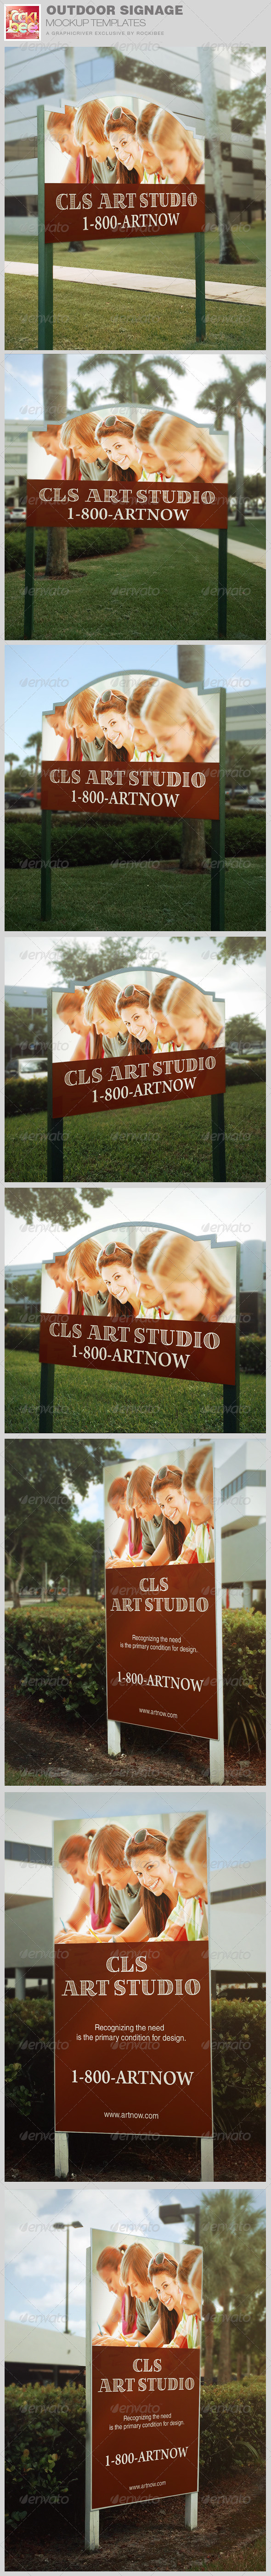 Outdoor signage mockup template image preview